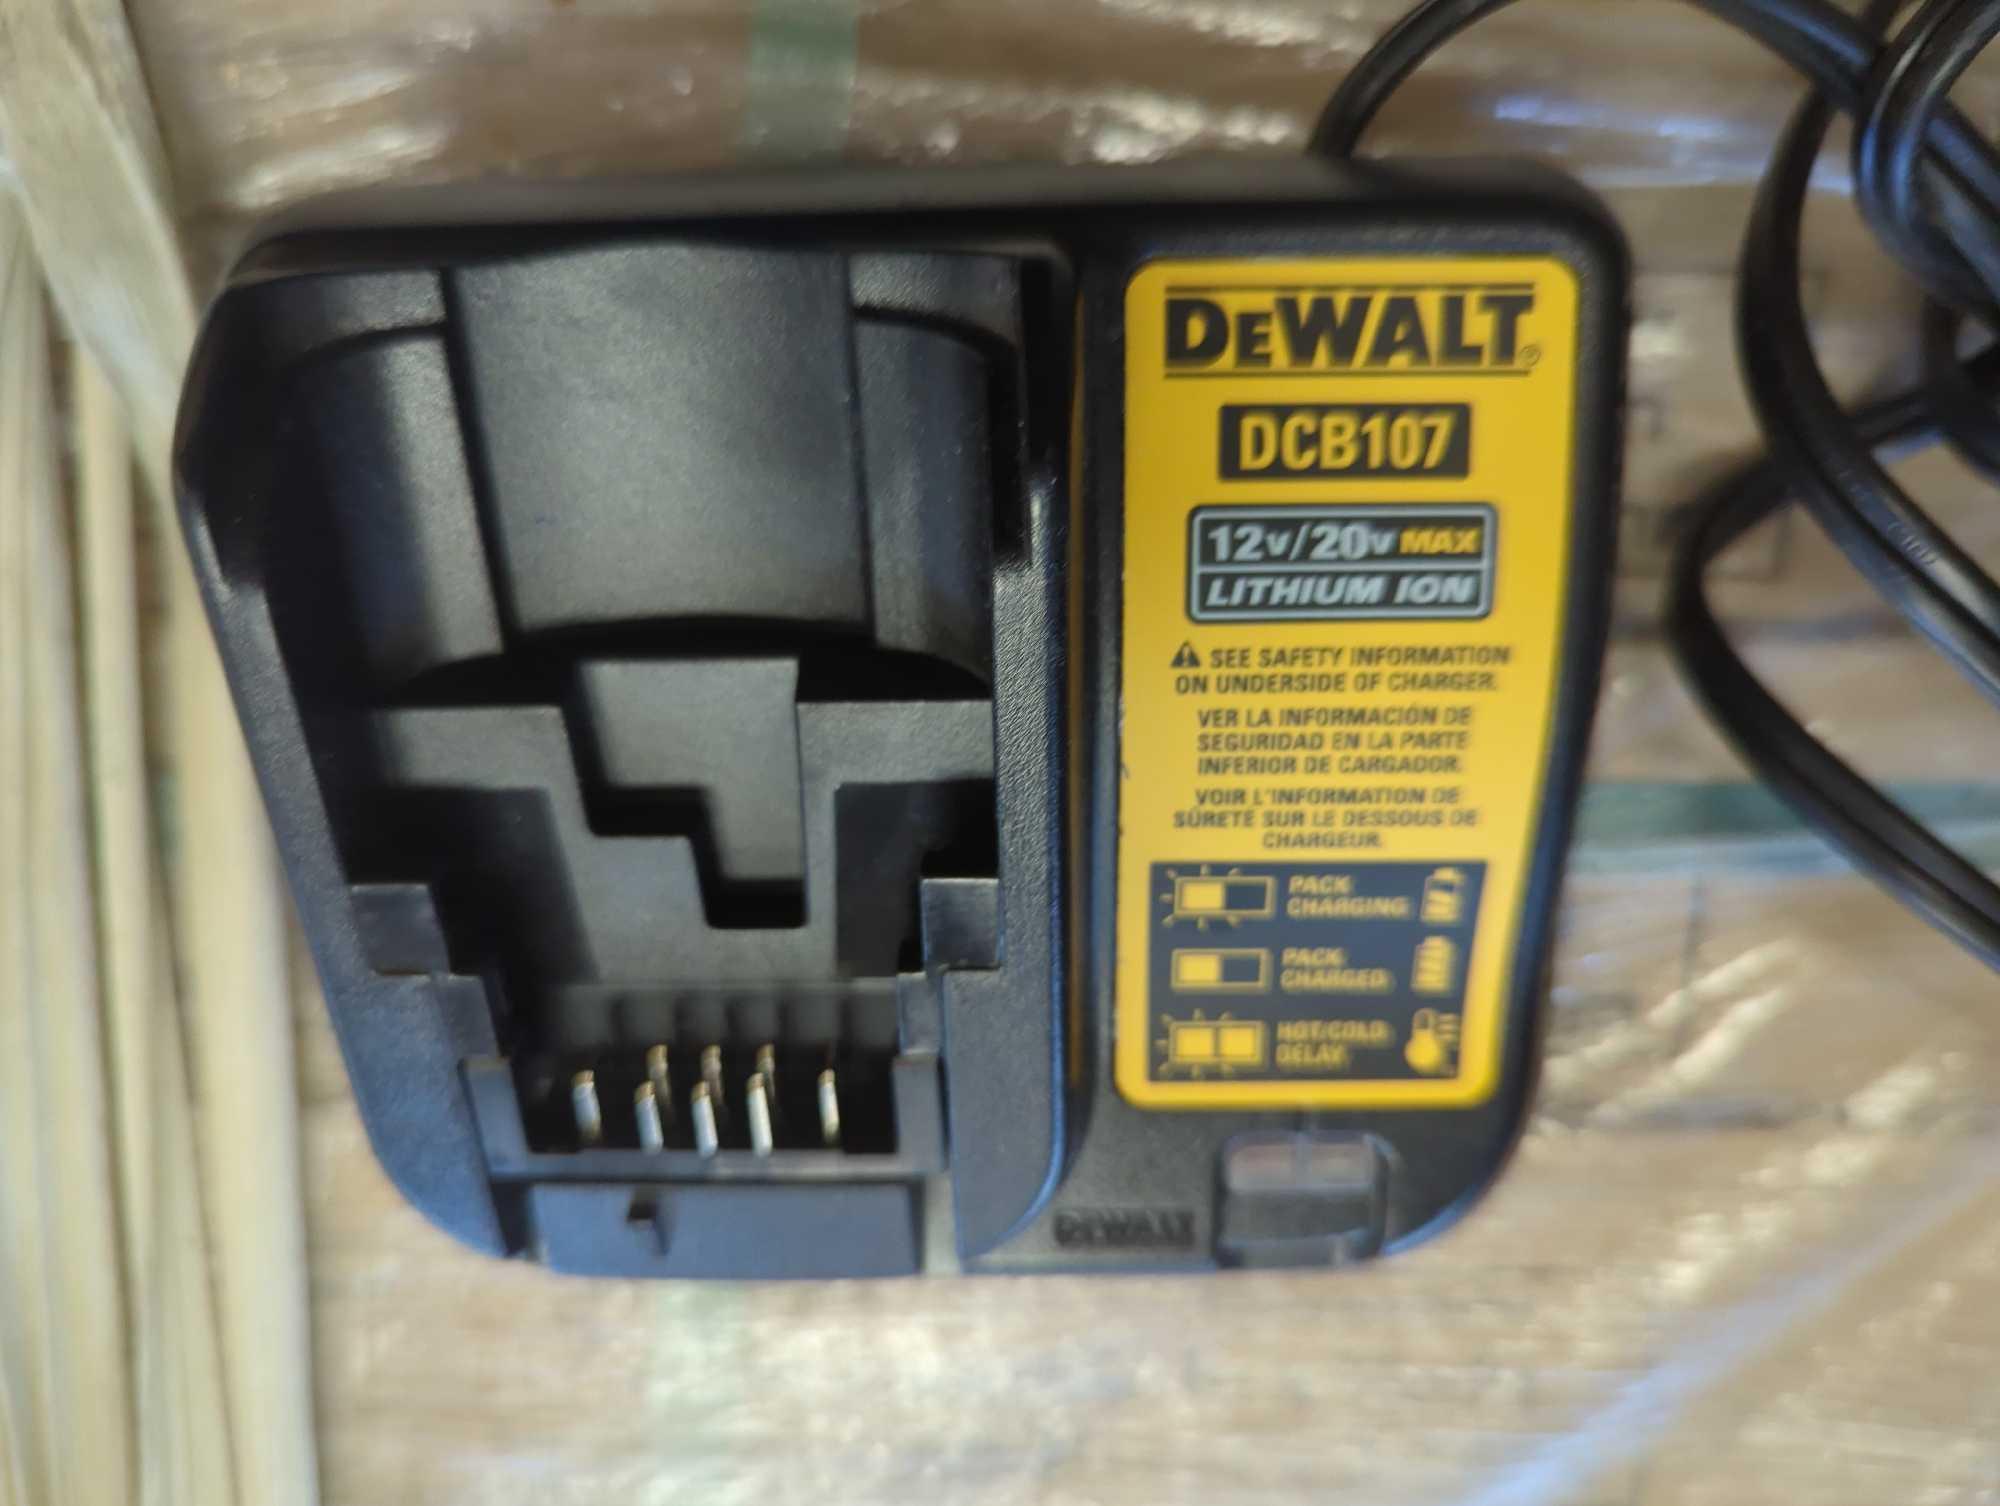 Lot of 2 DeWalt Items Including 20V MAX Compact Lithium-Ion 1.5Ah Battery Pack (Retail Price $89,